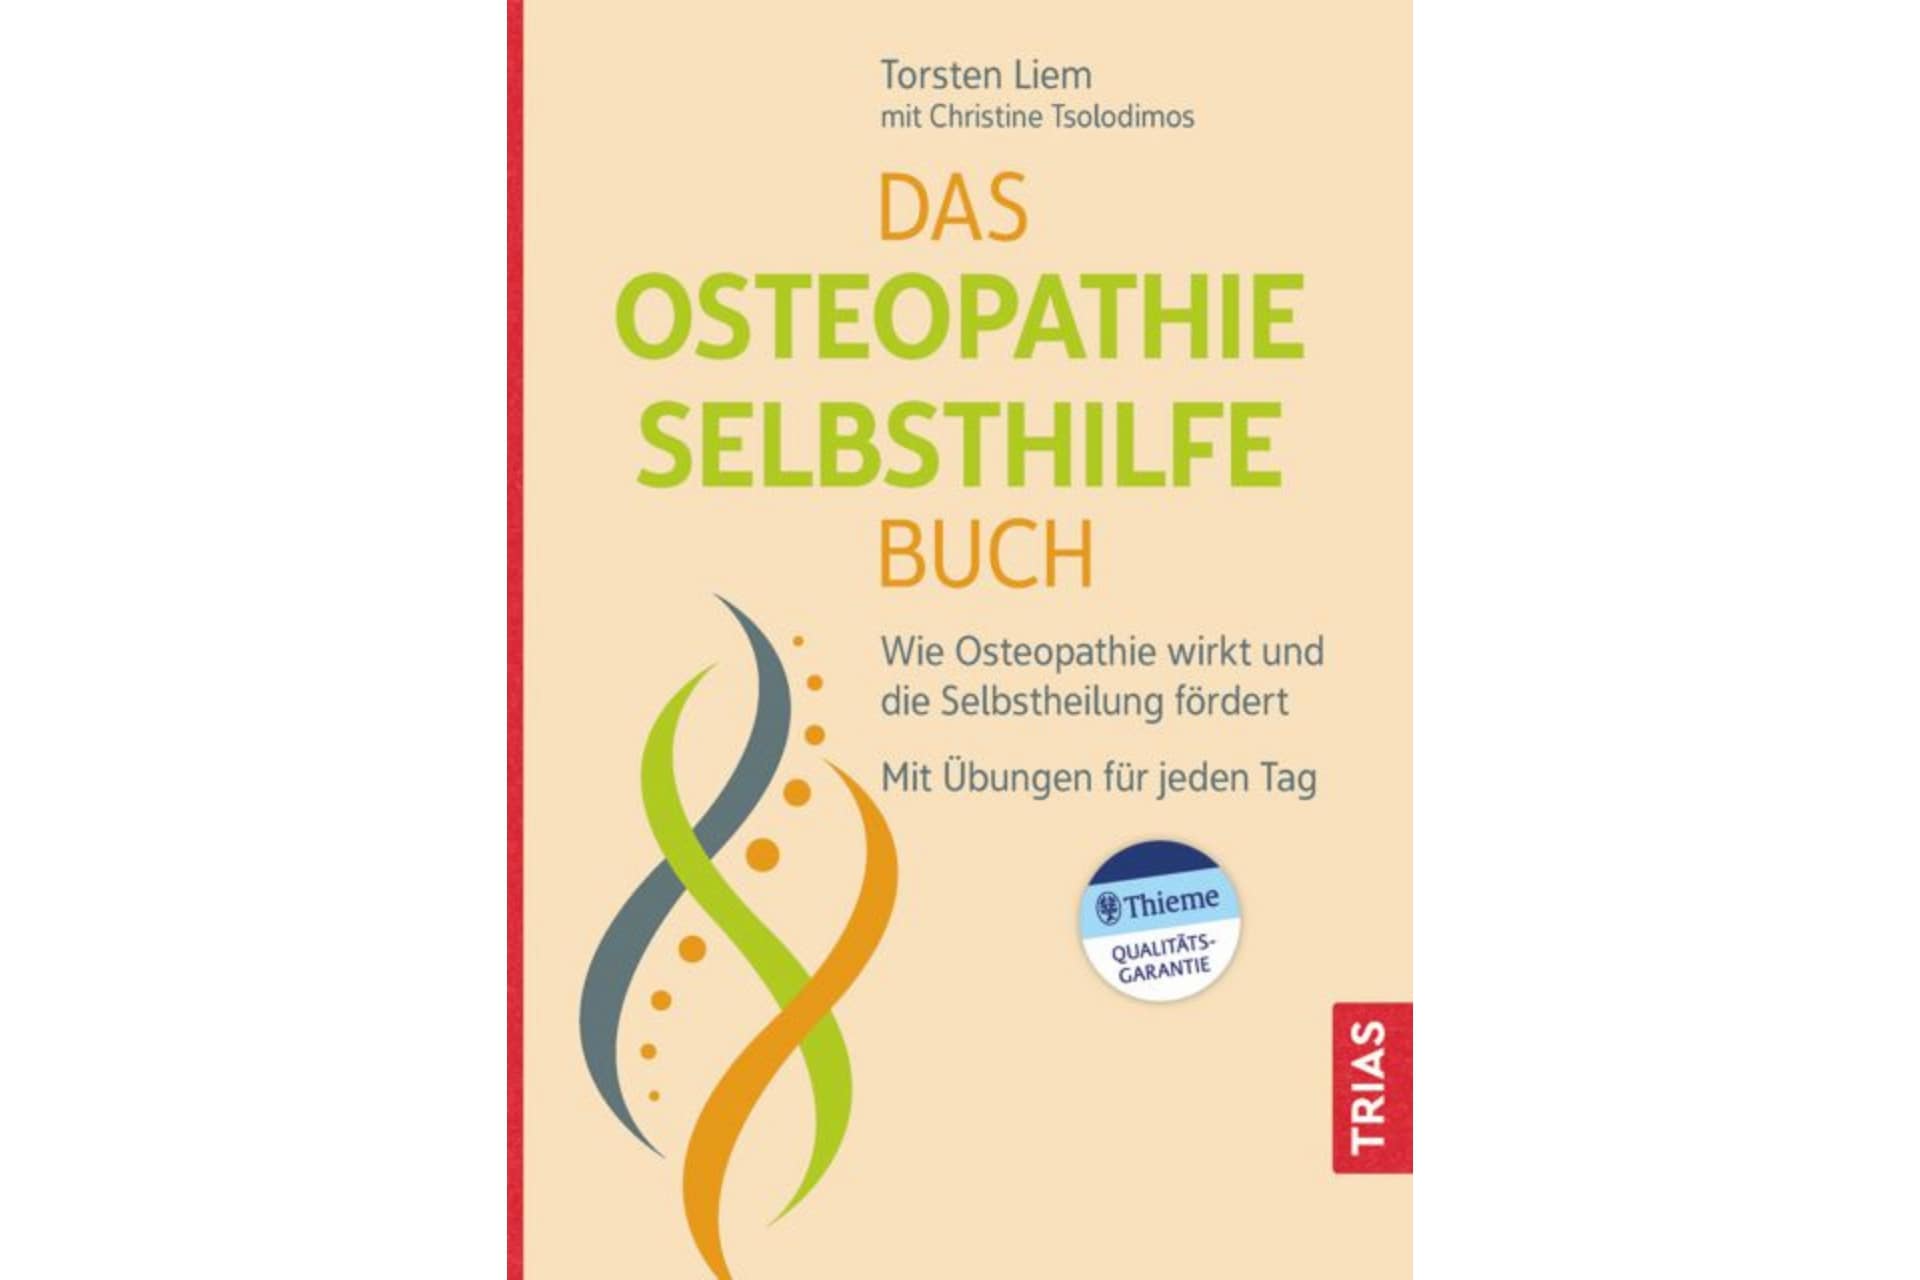 The cover of the osteopathic self-life book with Osteopathie Hamburg.